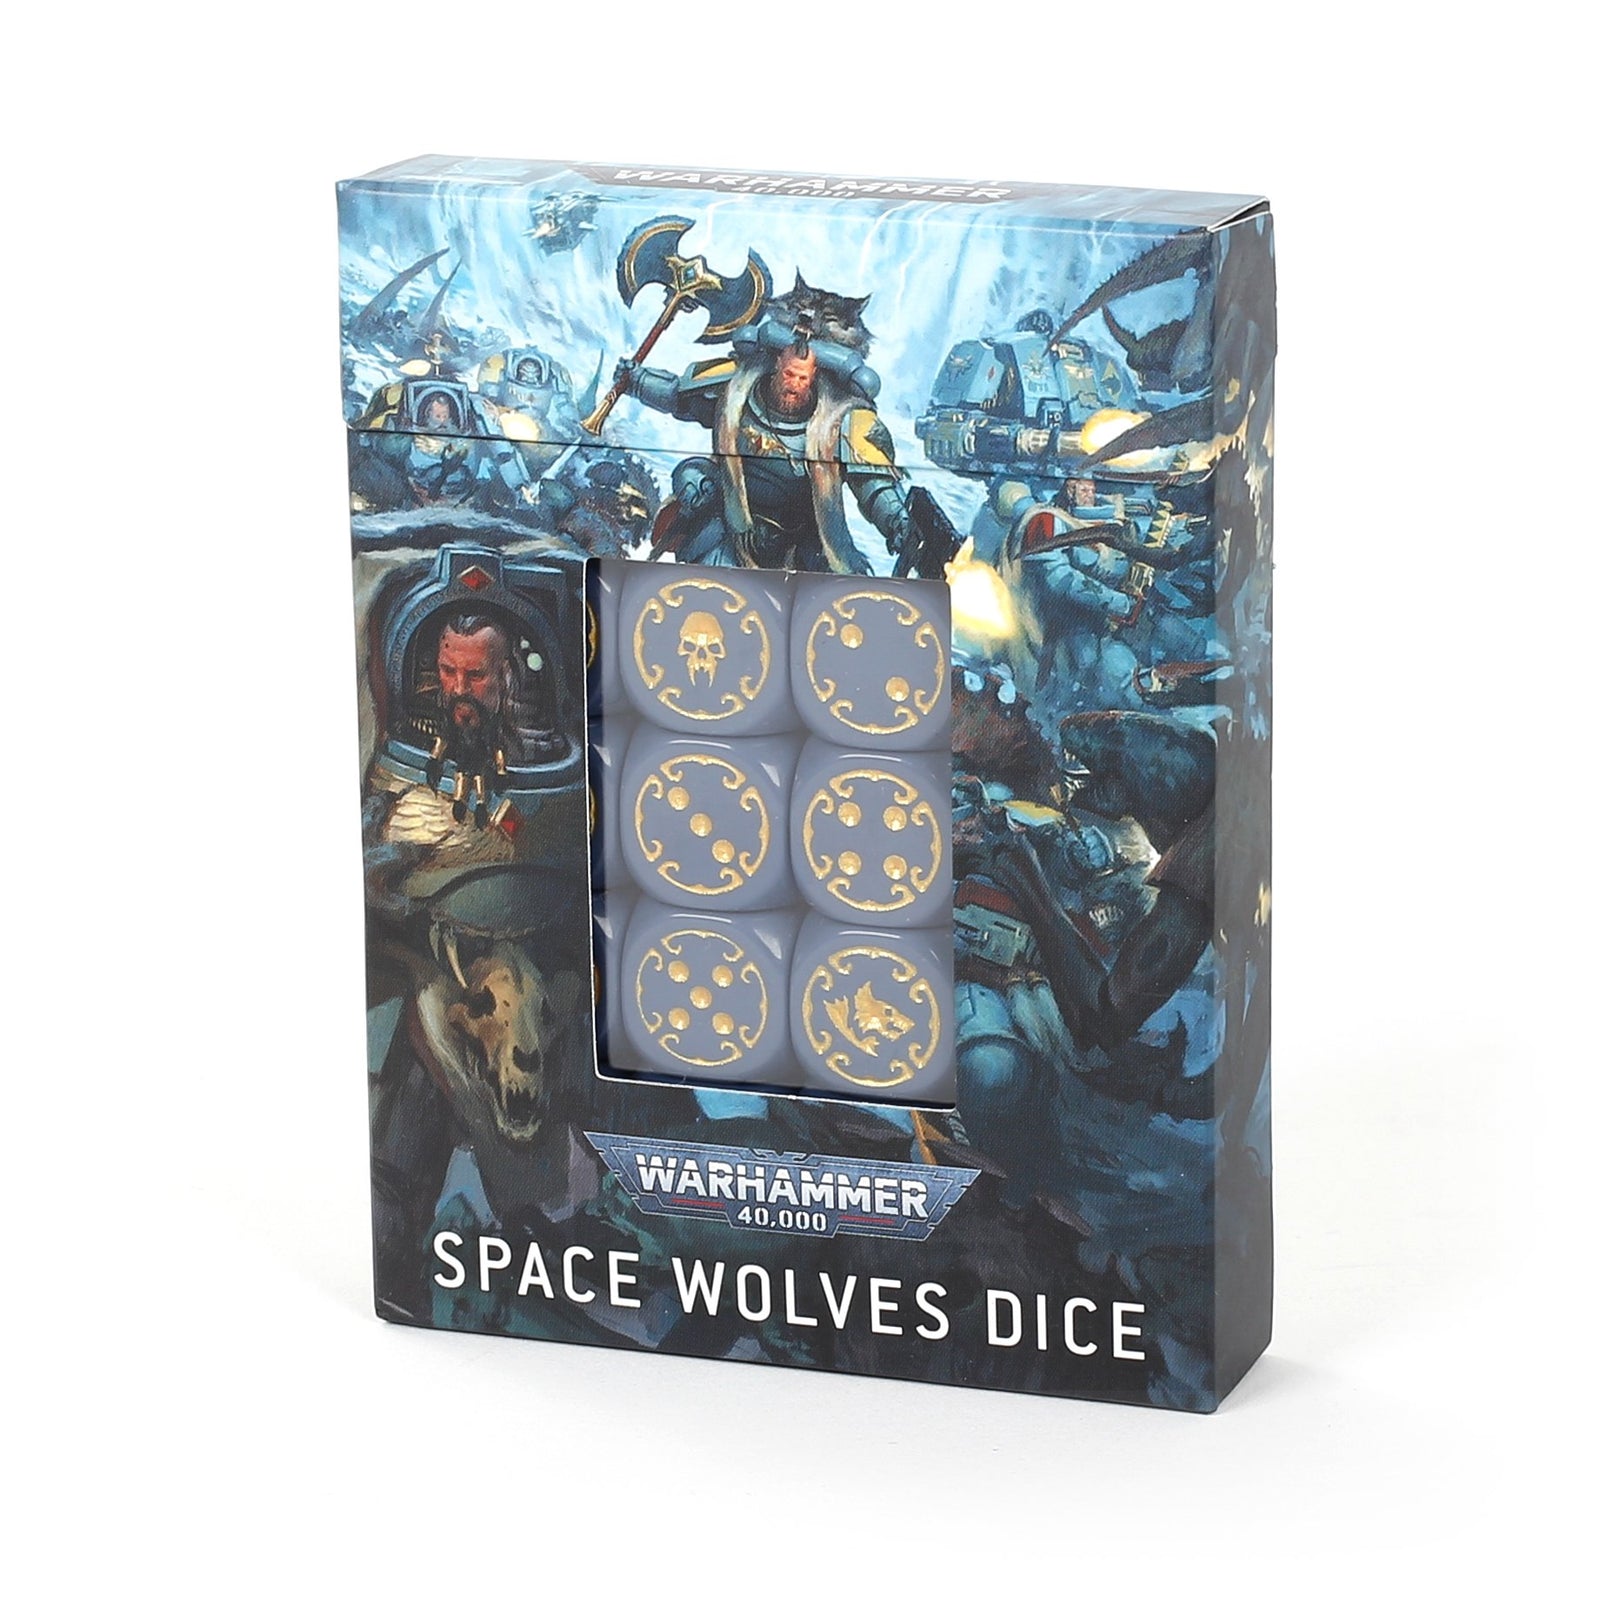 Packaging for Space Wolves Dice